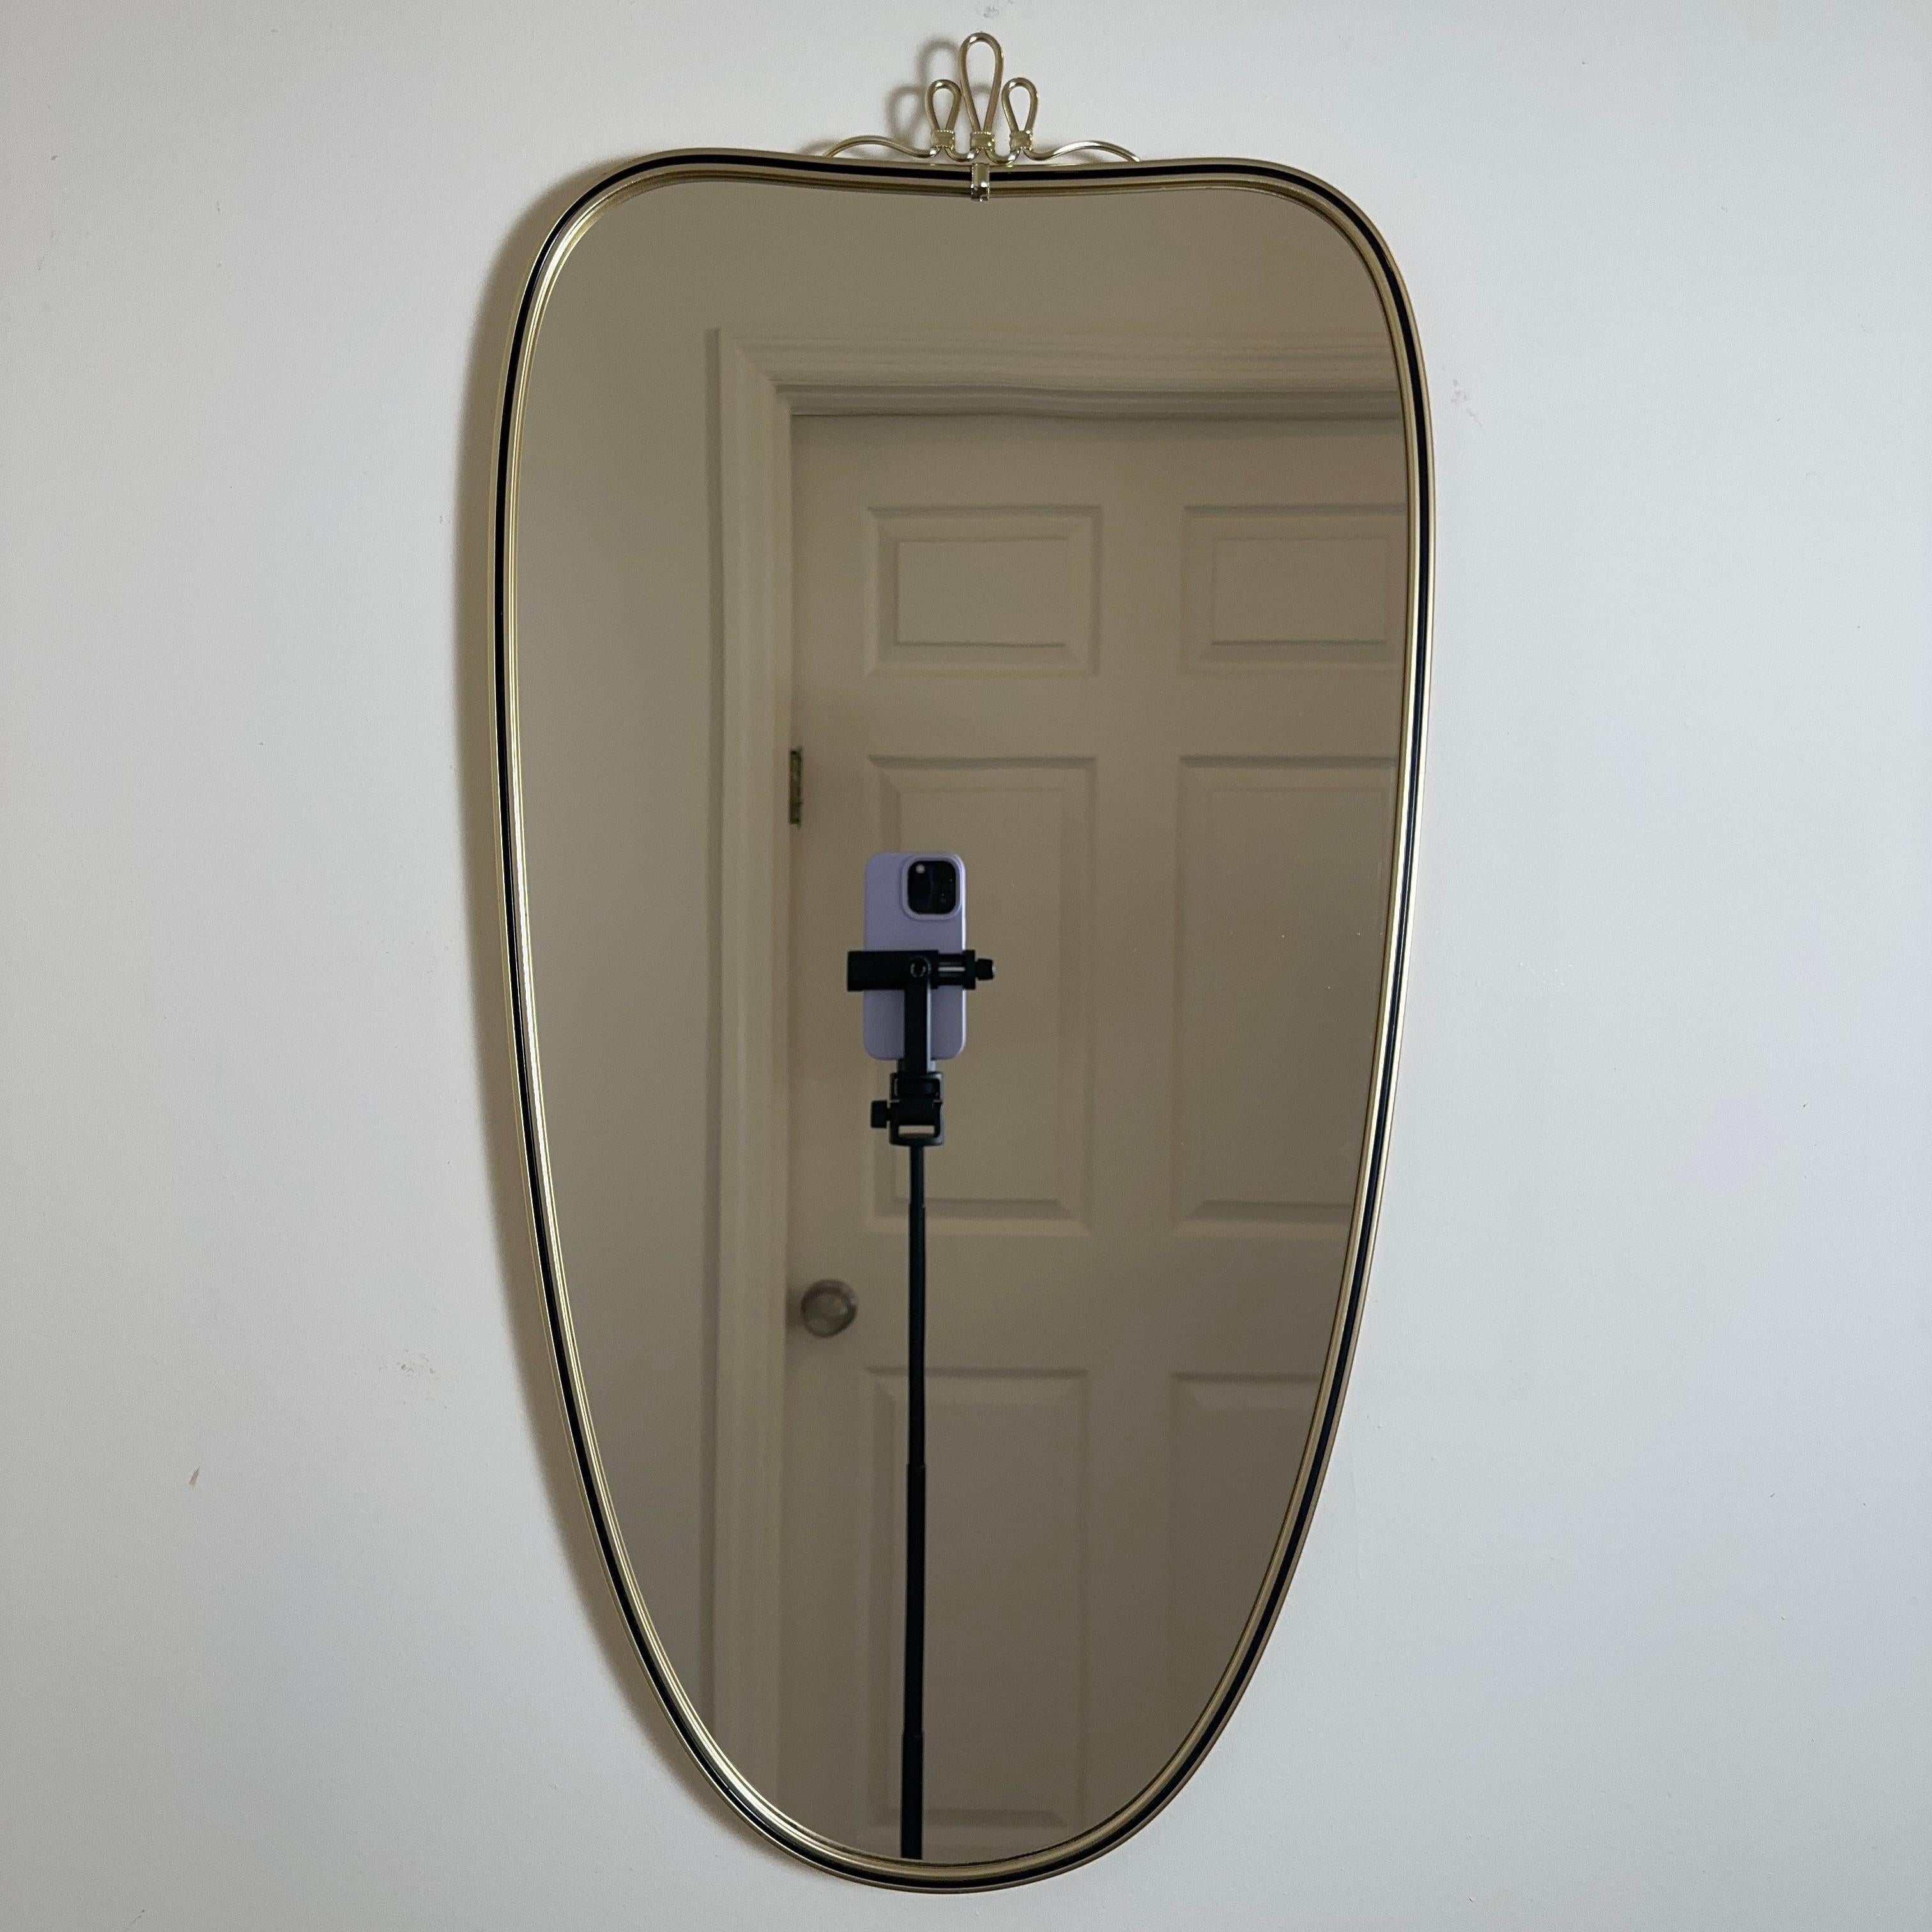 Vintage mid-century Italian brass wall mirror. In the shape of a subtle shield or heart, ringed by a black border. Topped with a looping ribbon detail, a wavy squiggle motif inspired by the designer Josef Frank. 

Right in size for a bathroom vanity